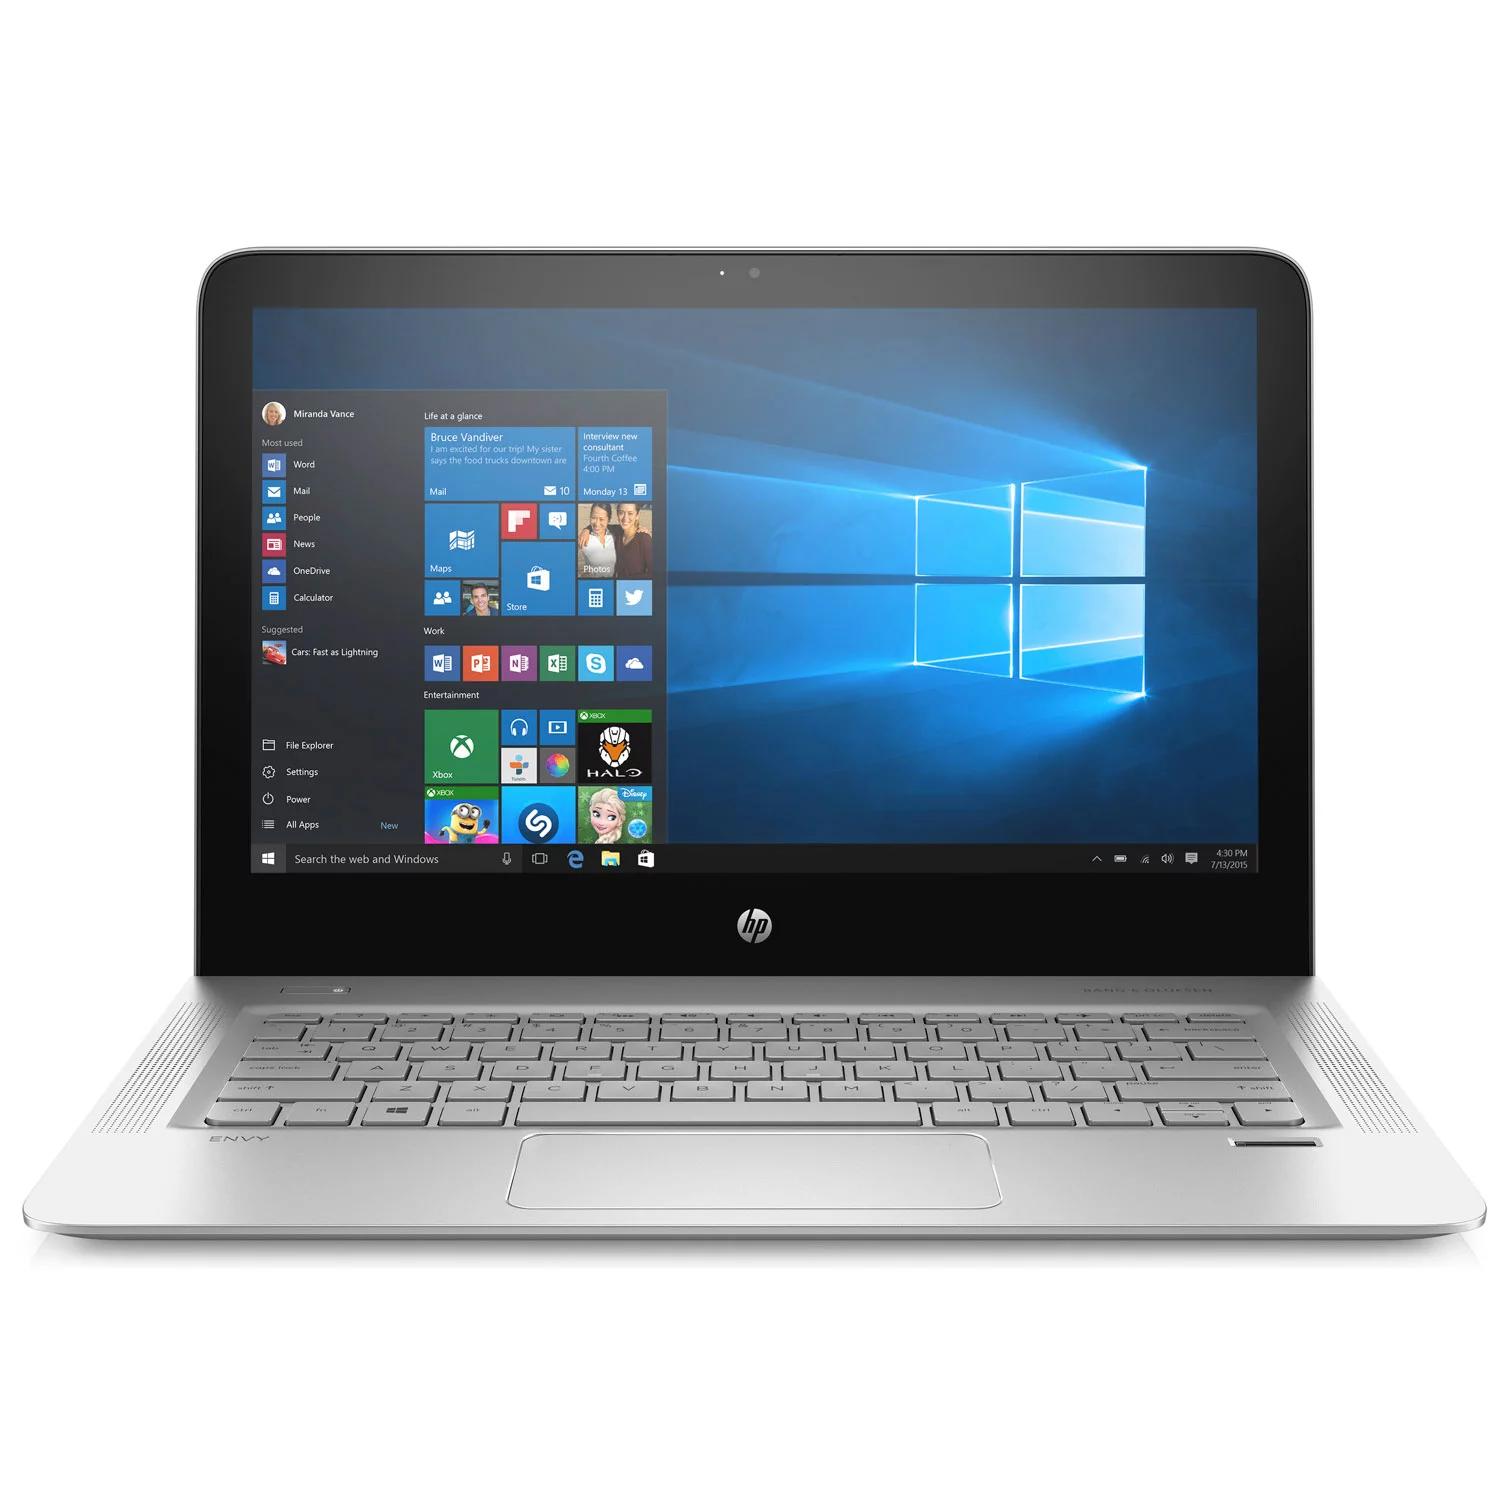 Hewlett packard envy 13-d040nr: the perfect laptop for students